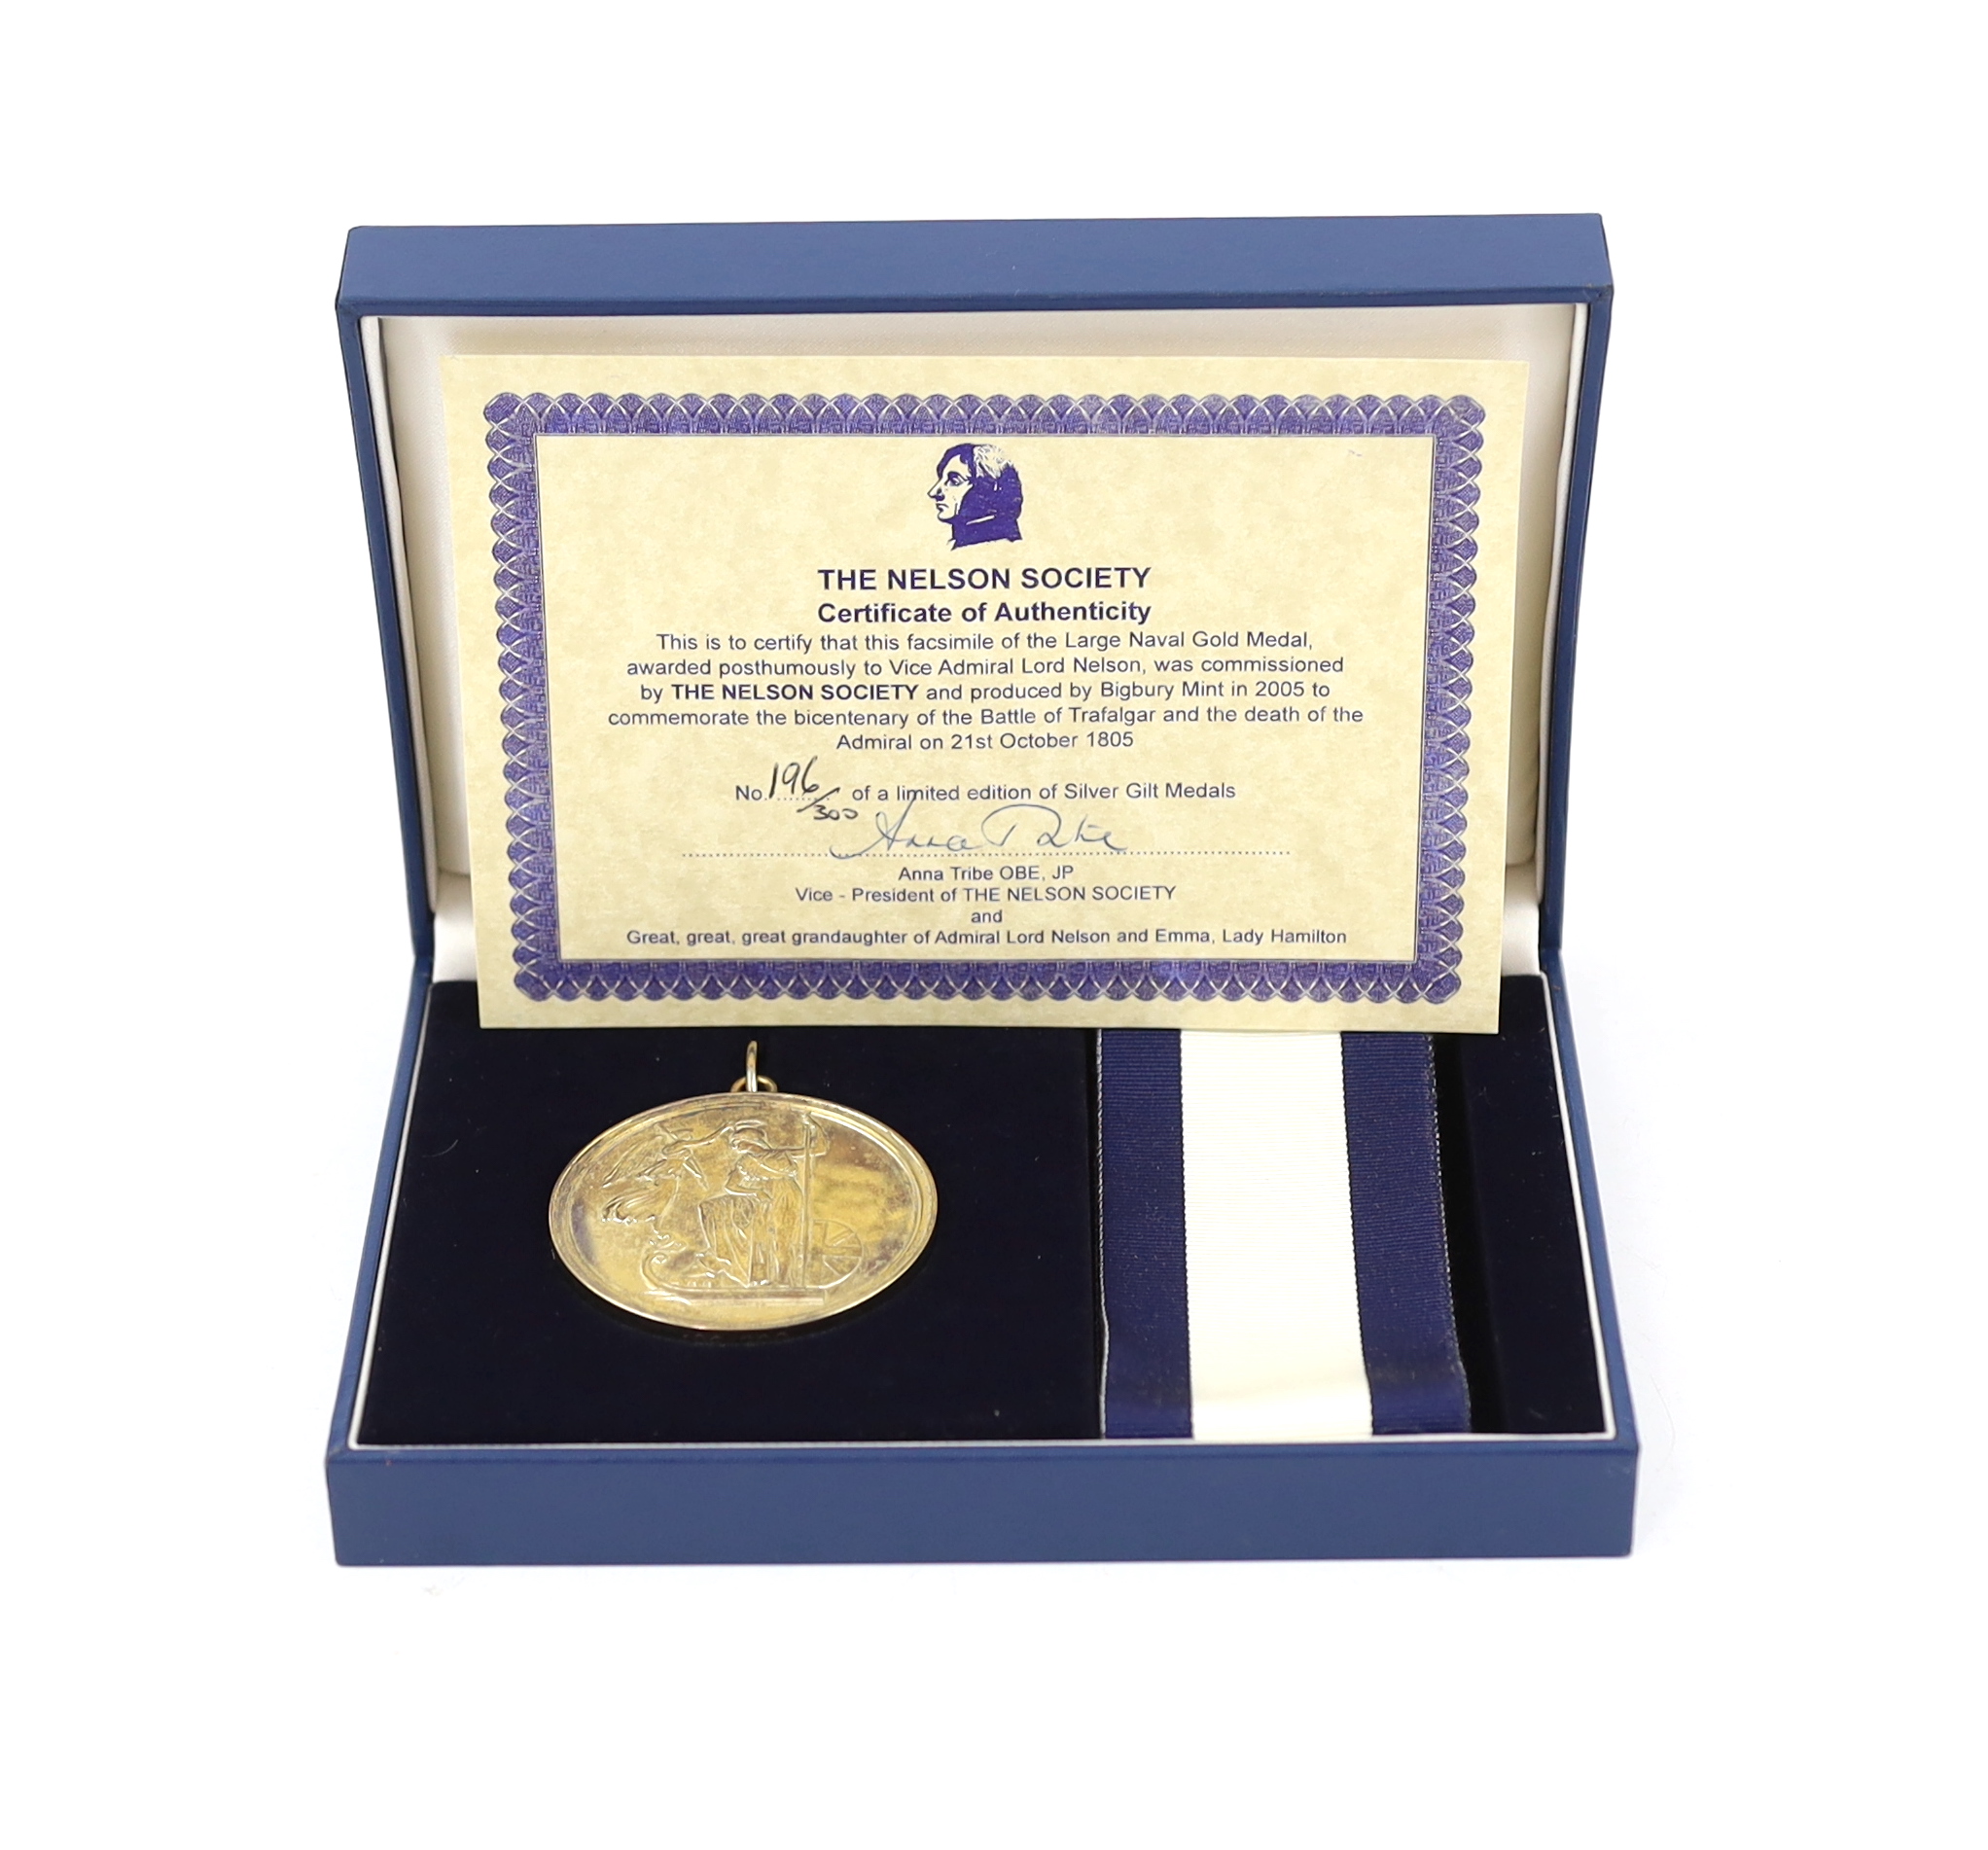 Nelson society, a silver-gilt replica of the large naval gold medal posthumously awarded to Vice Admiral Lord Nelson, limited edition number 196/300, cased